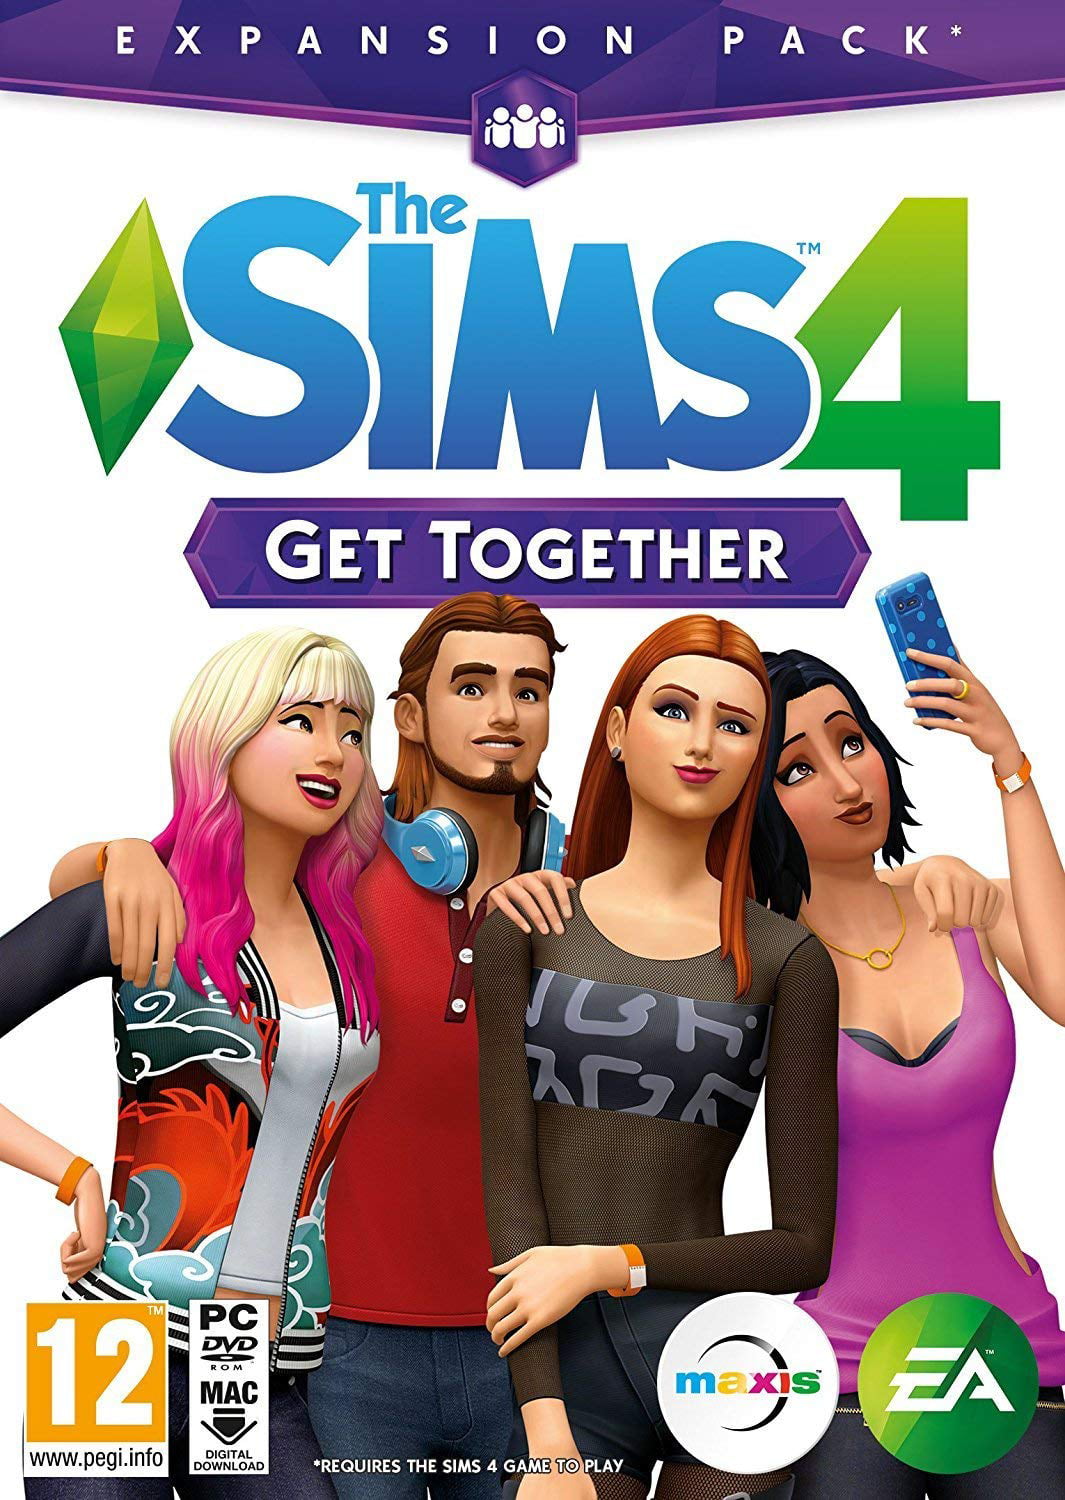 How to Play The Sims 4 for Free on PC, Mac, PlayStation, and Xbox - IGN